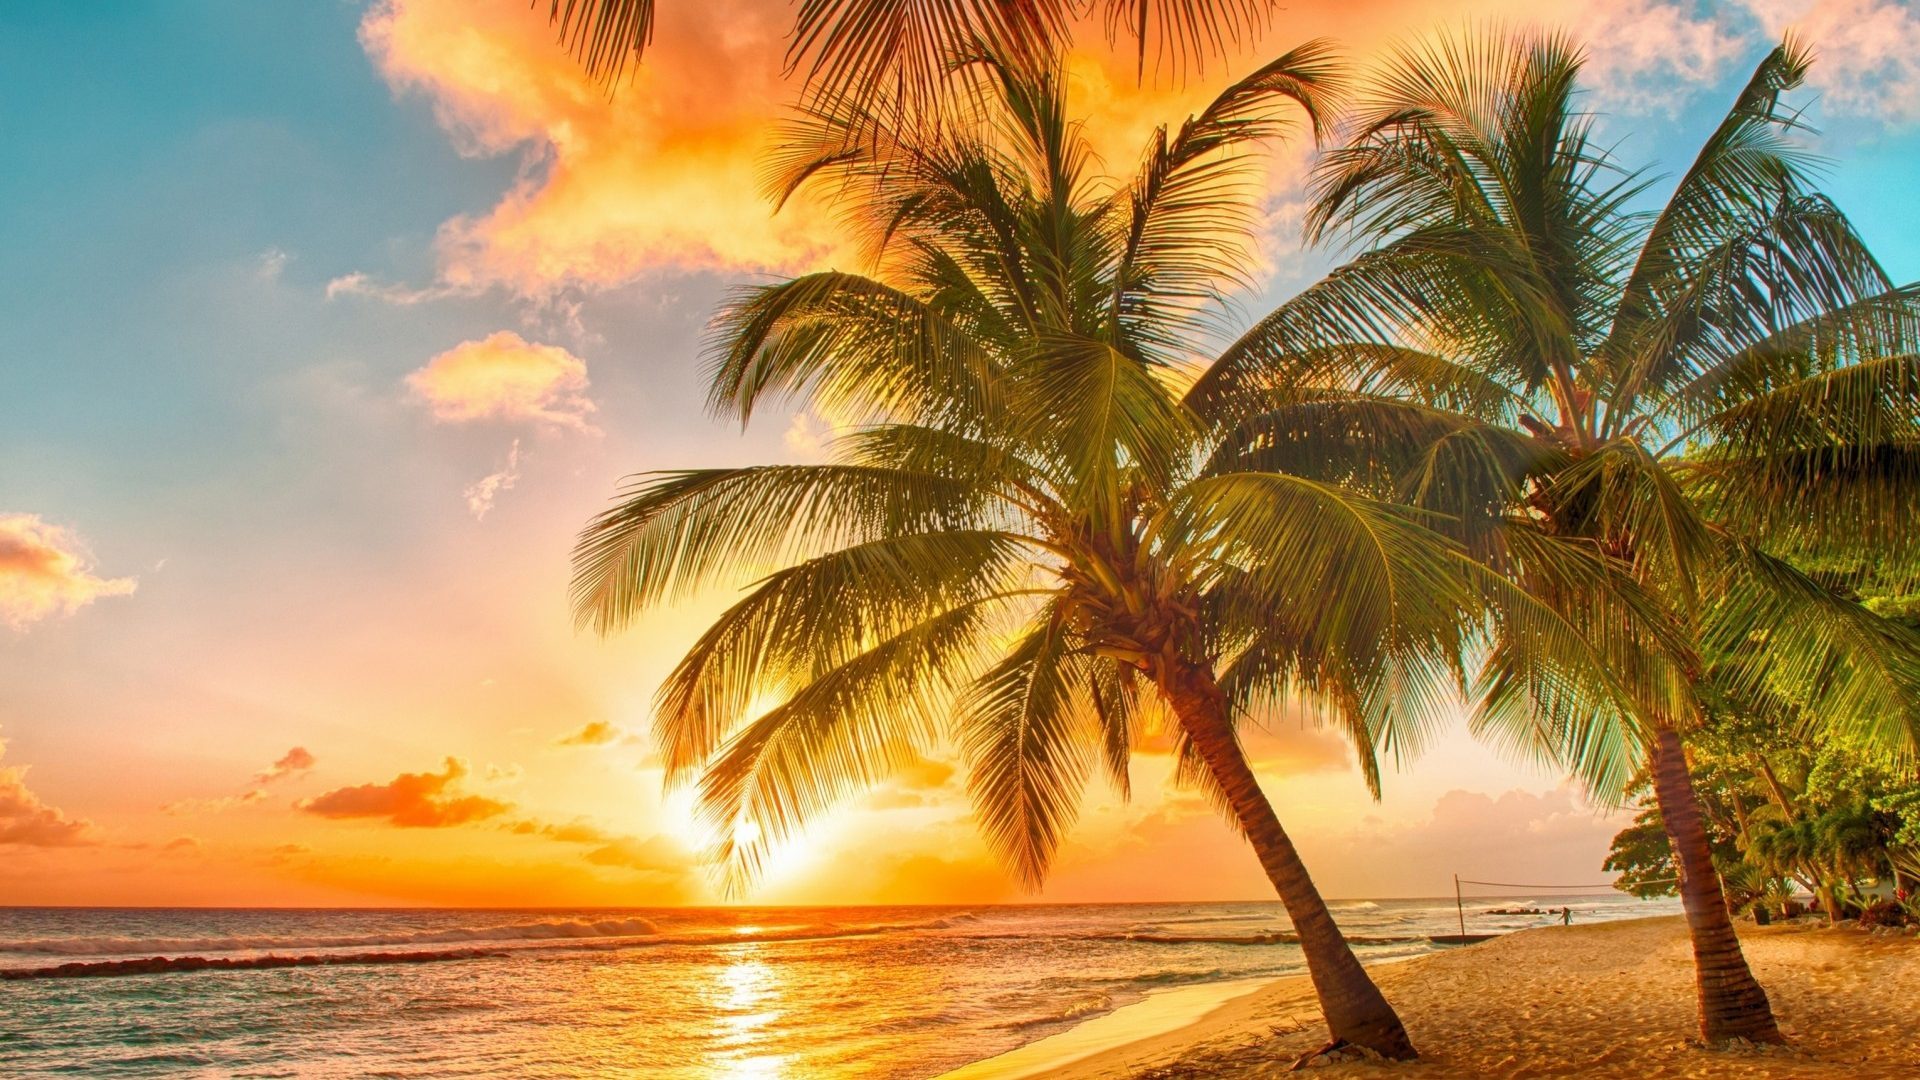 Tropical Sunset Palms Paradise Beach Sea Hd Wallpapers - Good Morning Nature Scene , HD Wallpaper & Backgrounds